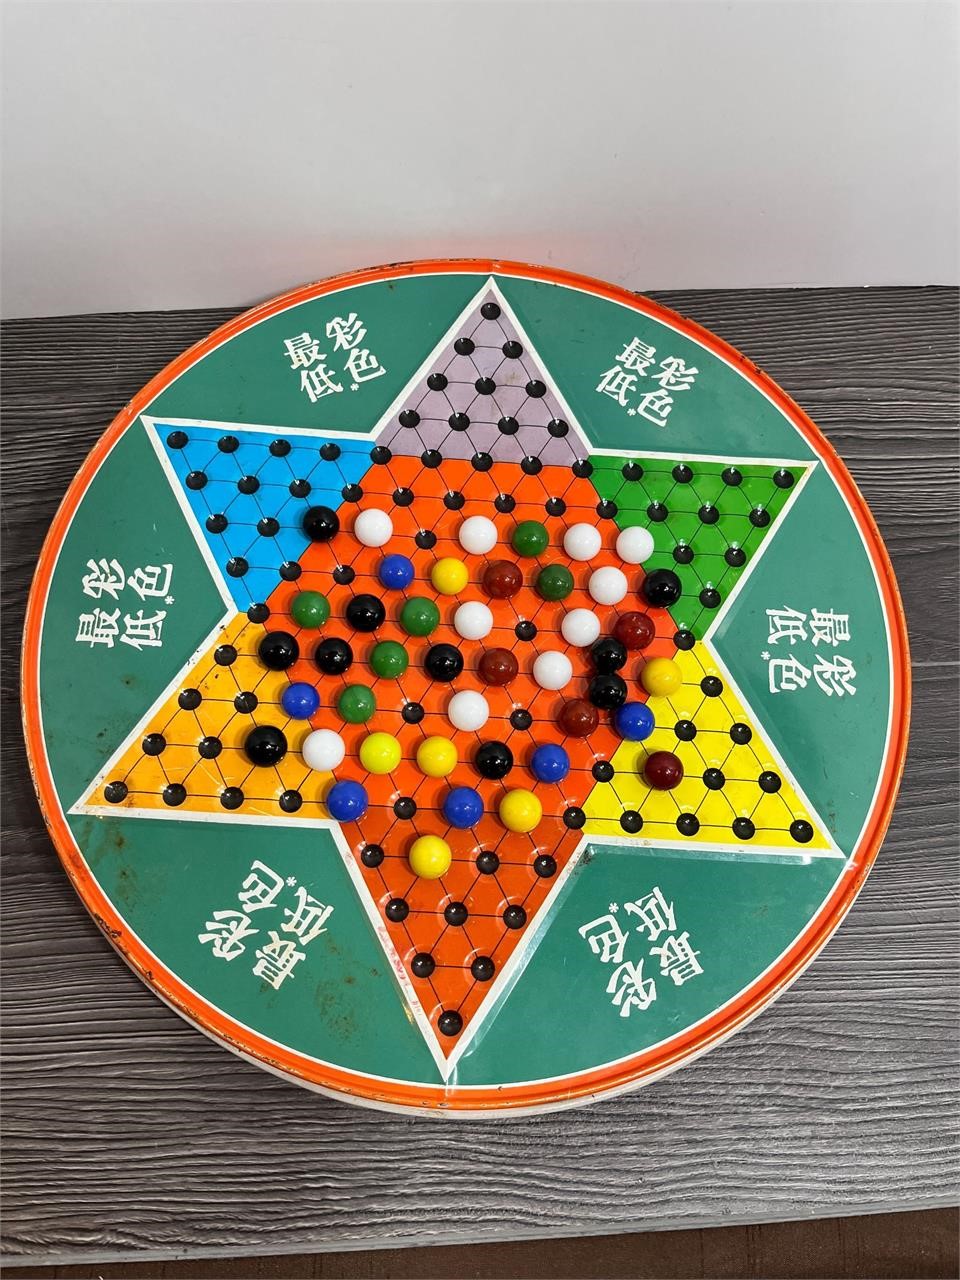 Ohio Art Chinese Checkers Tin W/ Marbles